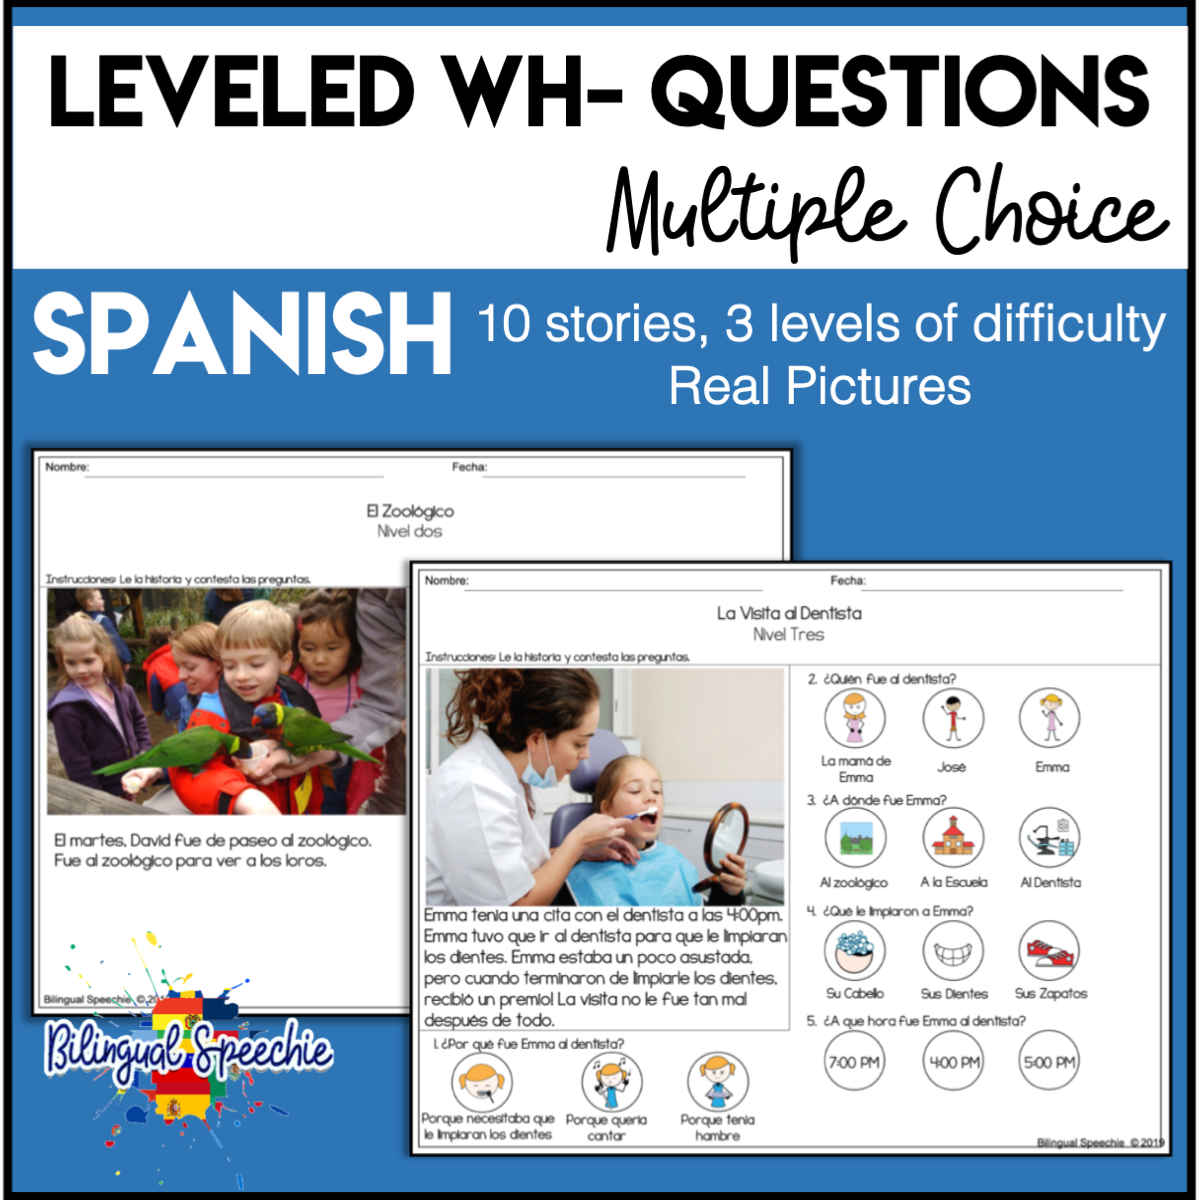 Spanish | Leveled WH- Questions